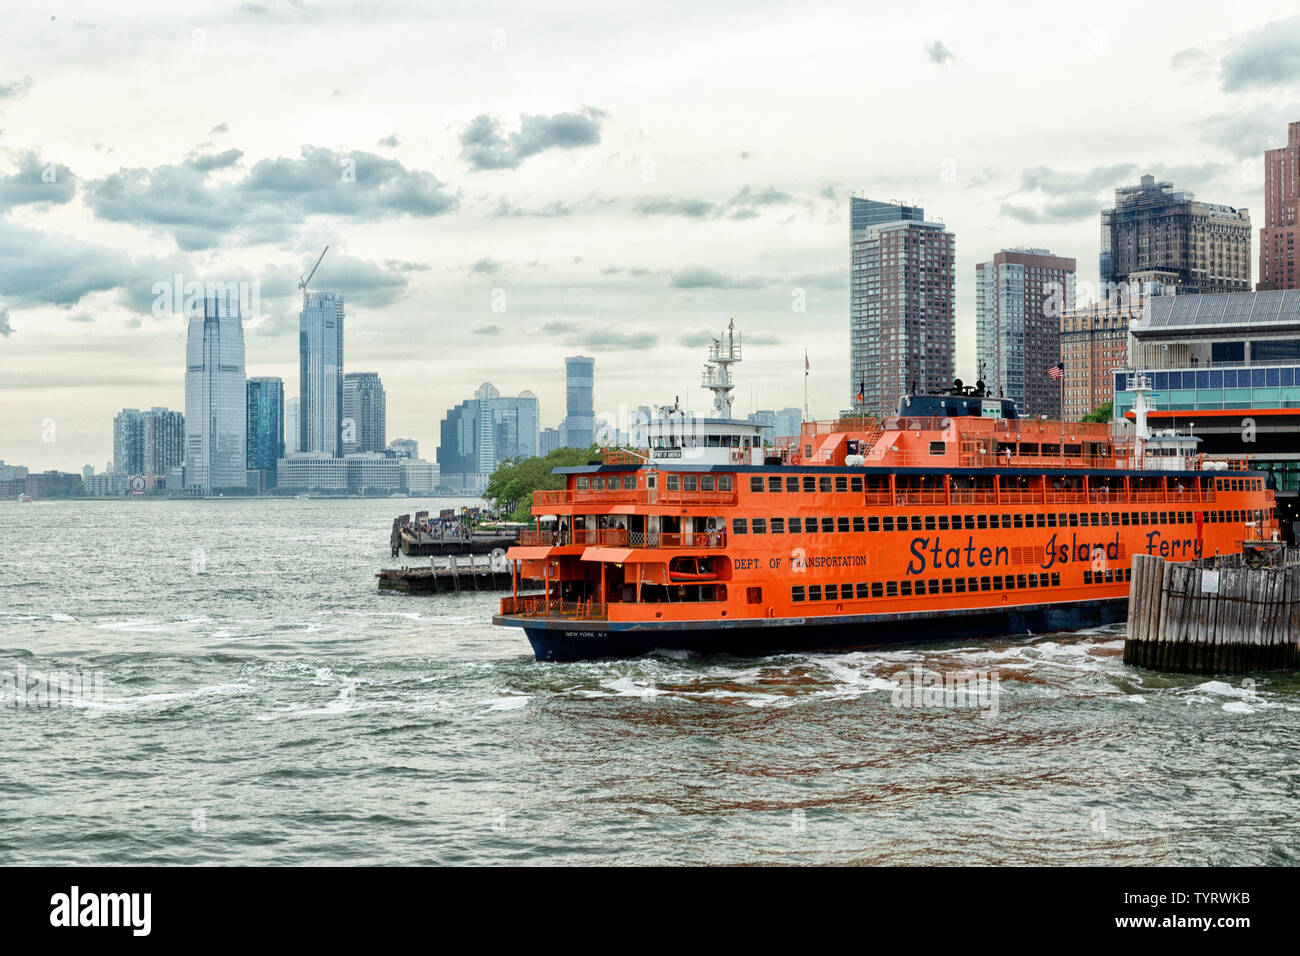 The Staten Island Ferry is a passenger ferry route that transports commuters between New York Harbor between Manhattan and Staten Island Stock Photo